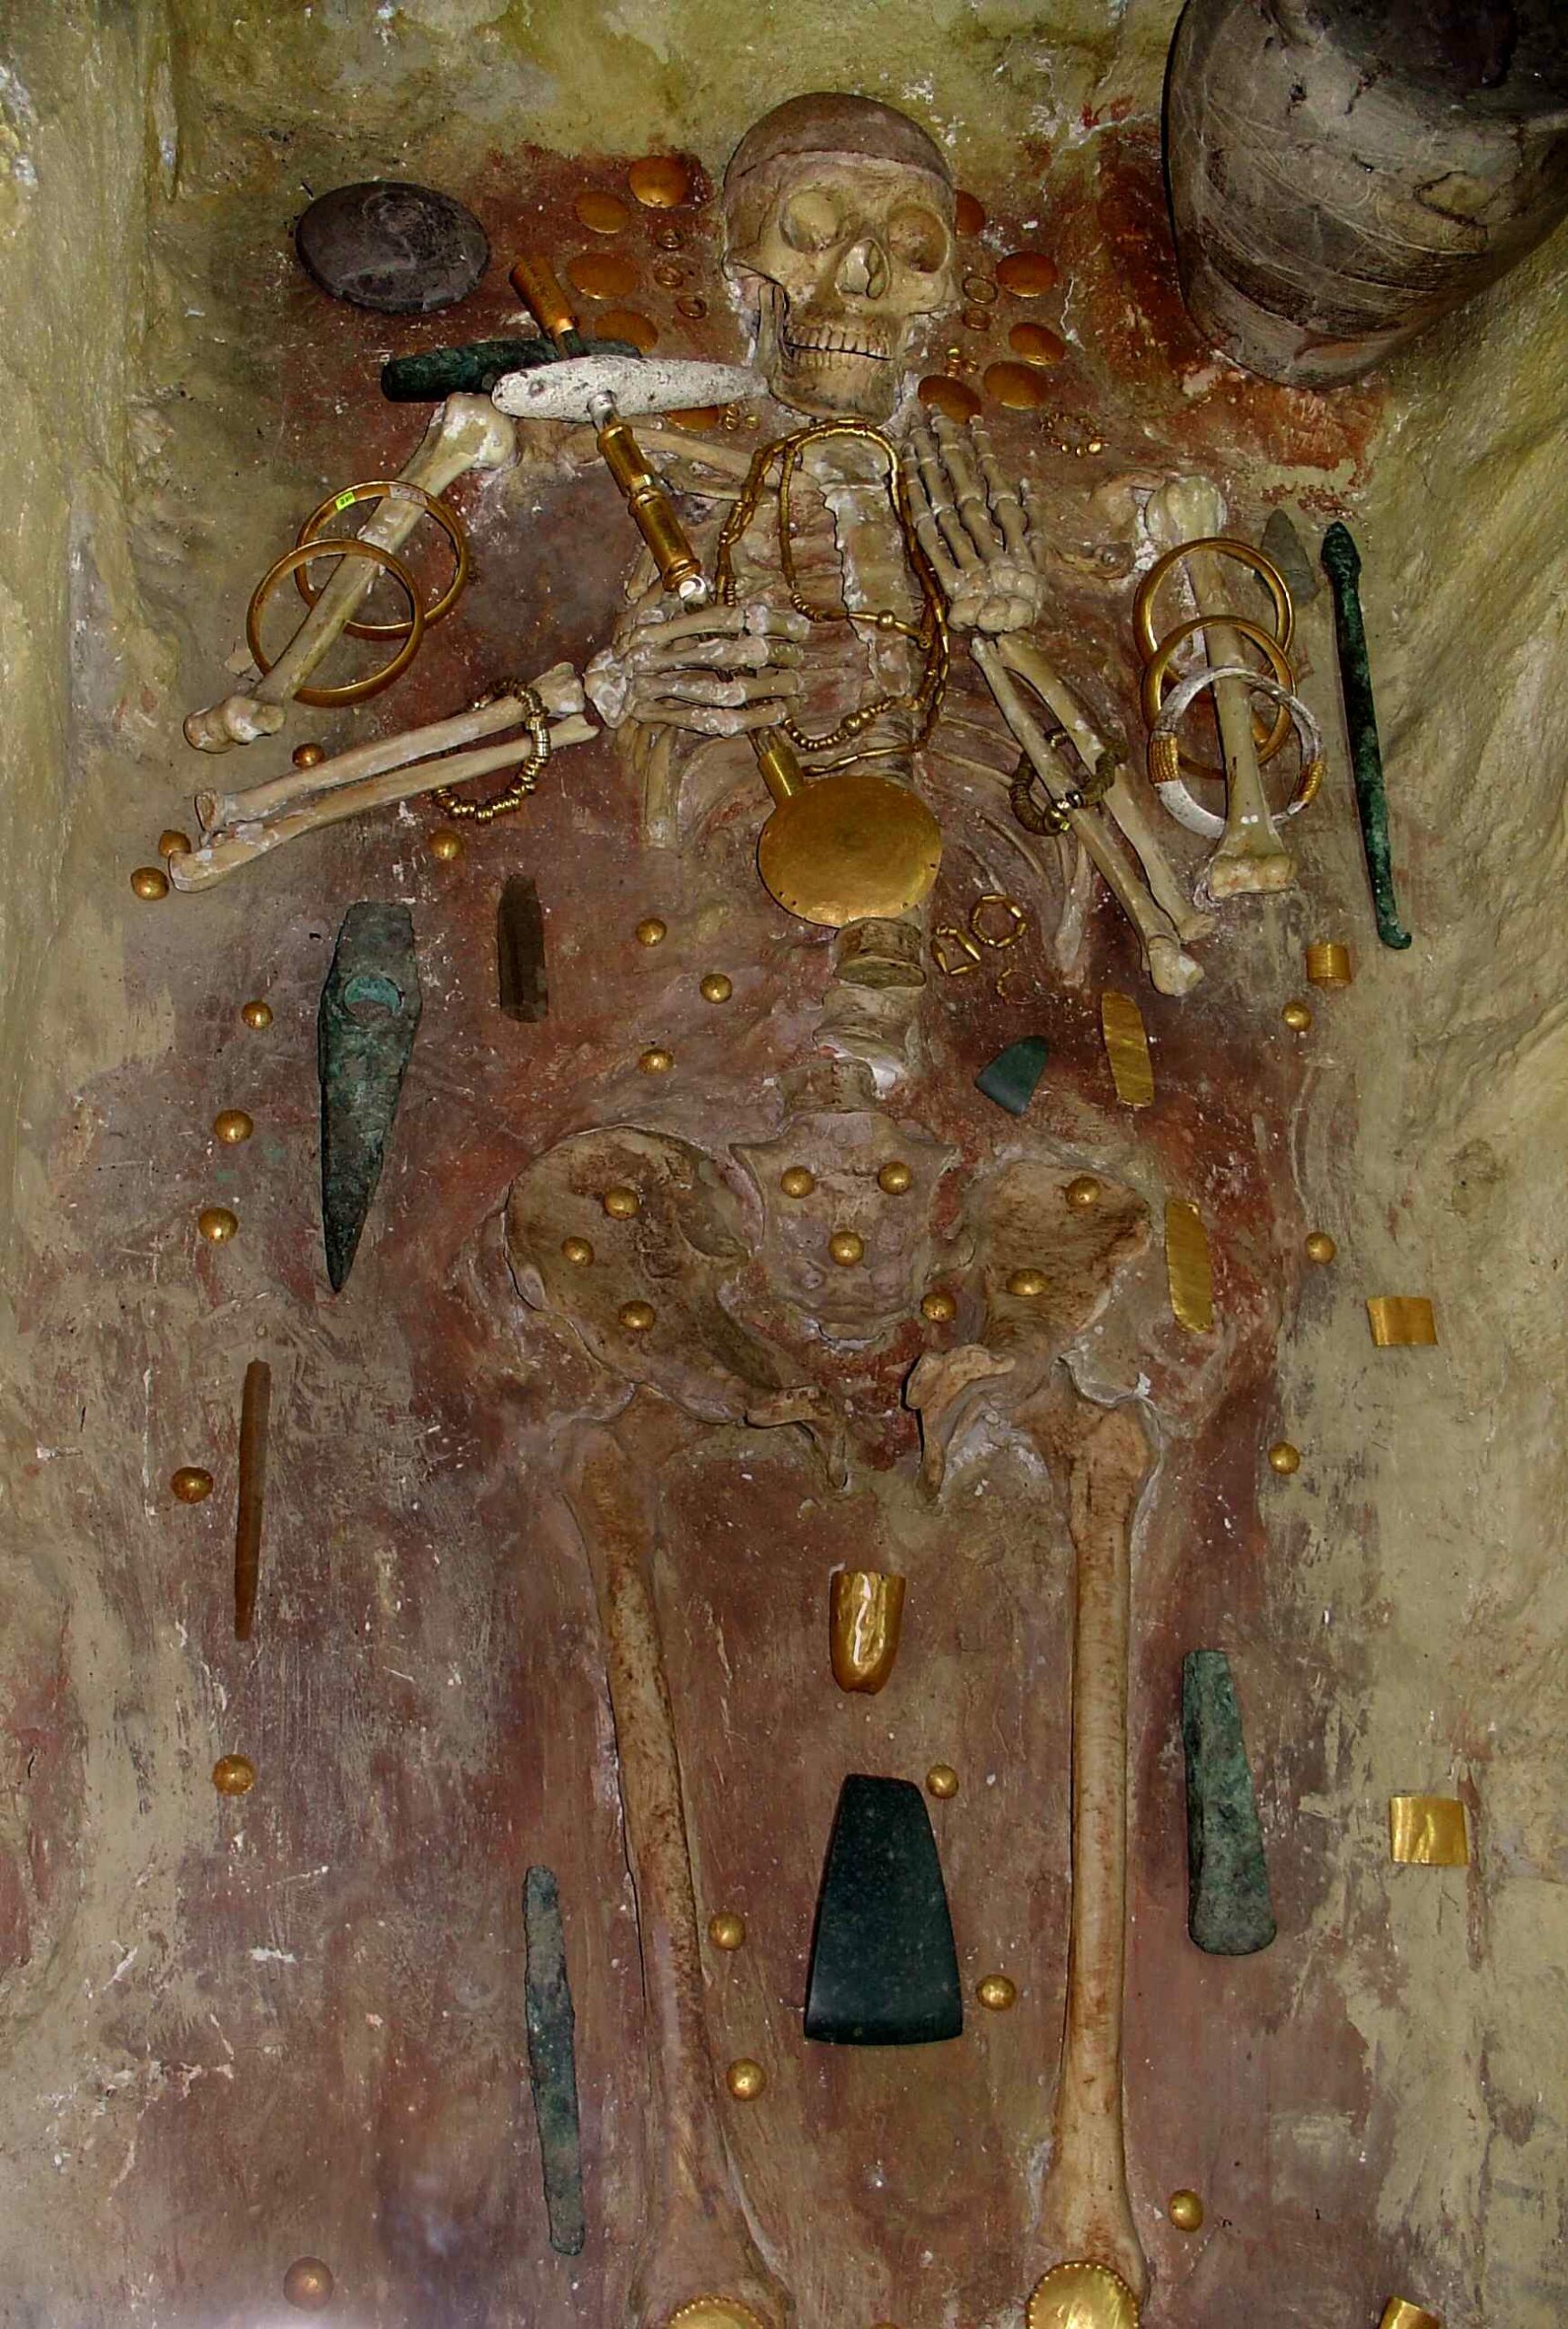 A tomb from the Varna necropolis (Bulgaria), circa 4600 BC, with the world's oldest gold jewellery yet discovered.